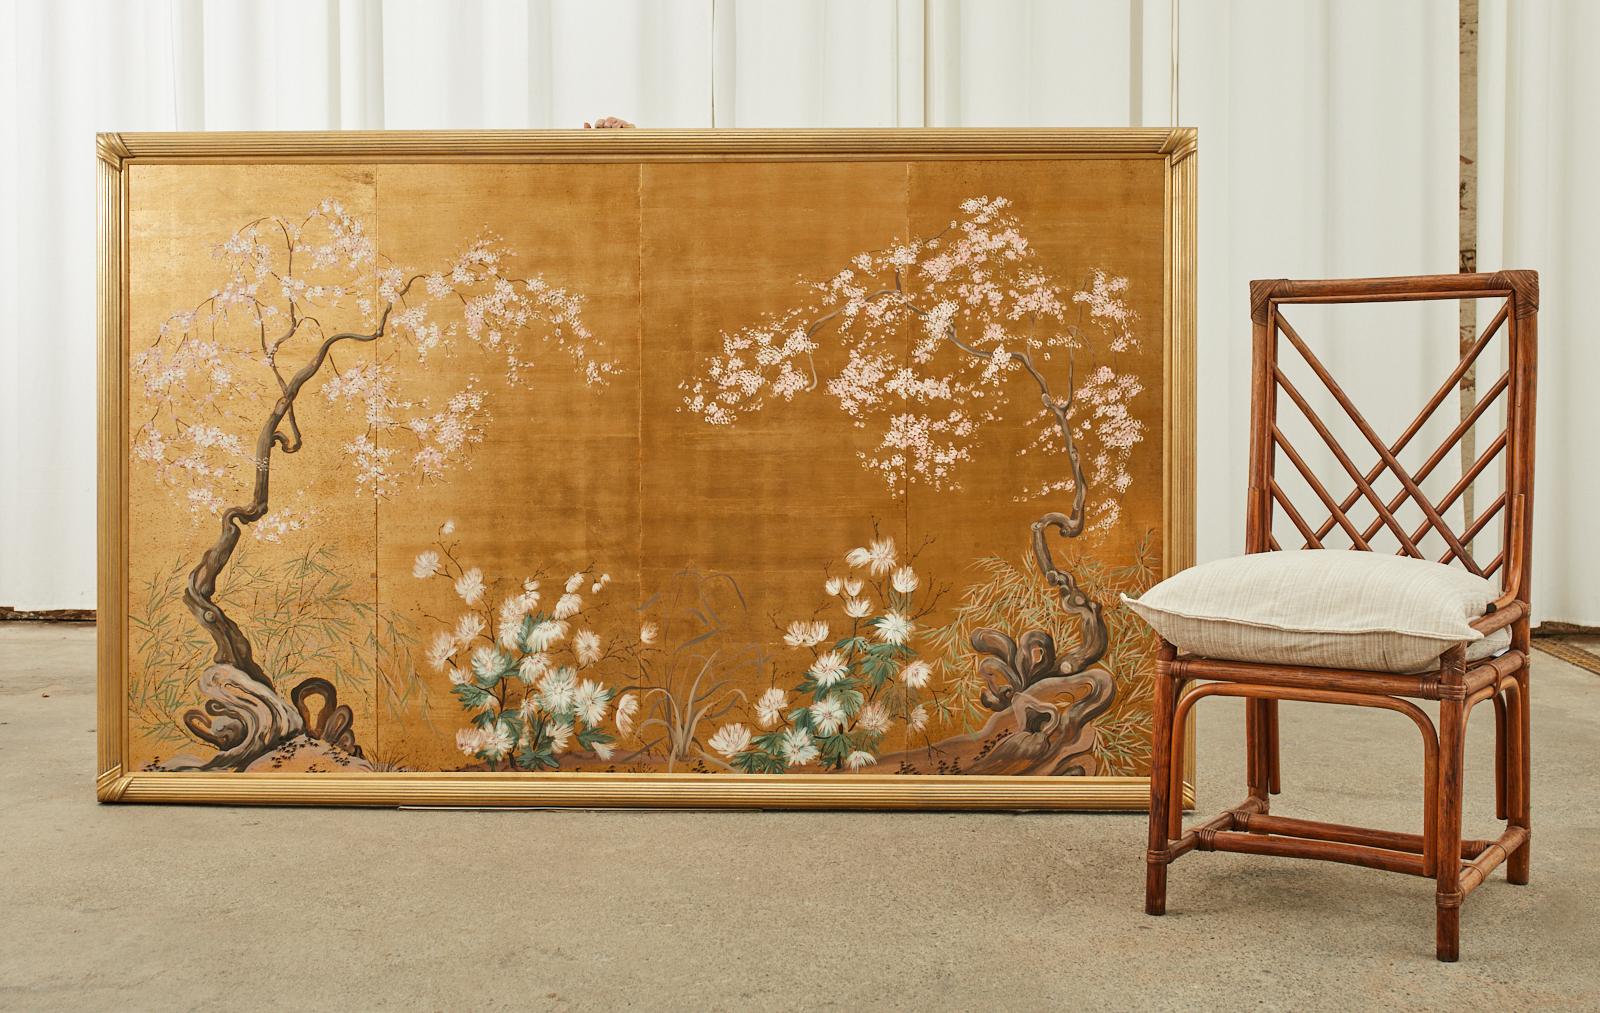 Amazing four panel screen mounted in an opulent gilt, reeded frame depicting a spring floral landscape with cherry blossoms. Made in the Japanese Meiji period style in the manner of Robert Crowder and Gracie. Ink and natural pigments on a dramatic